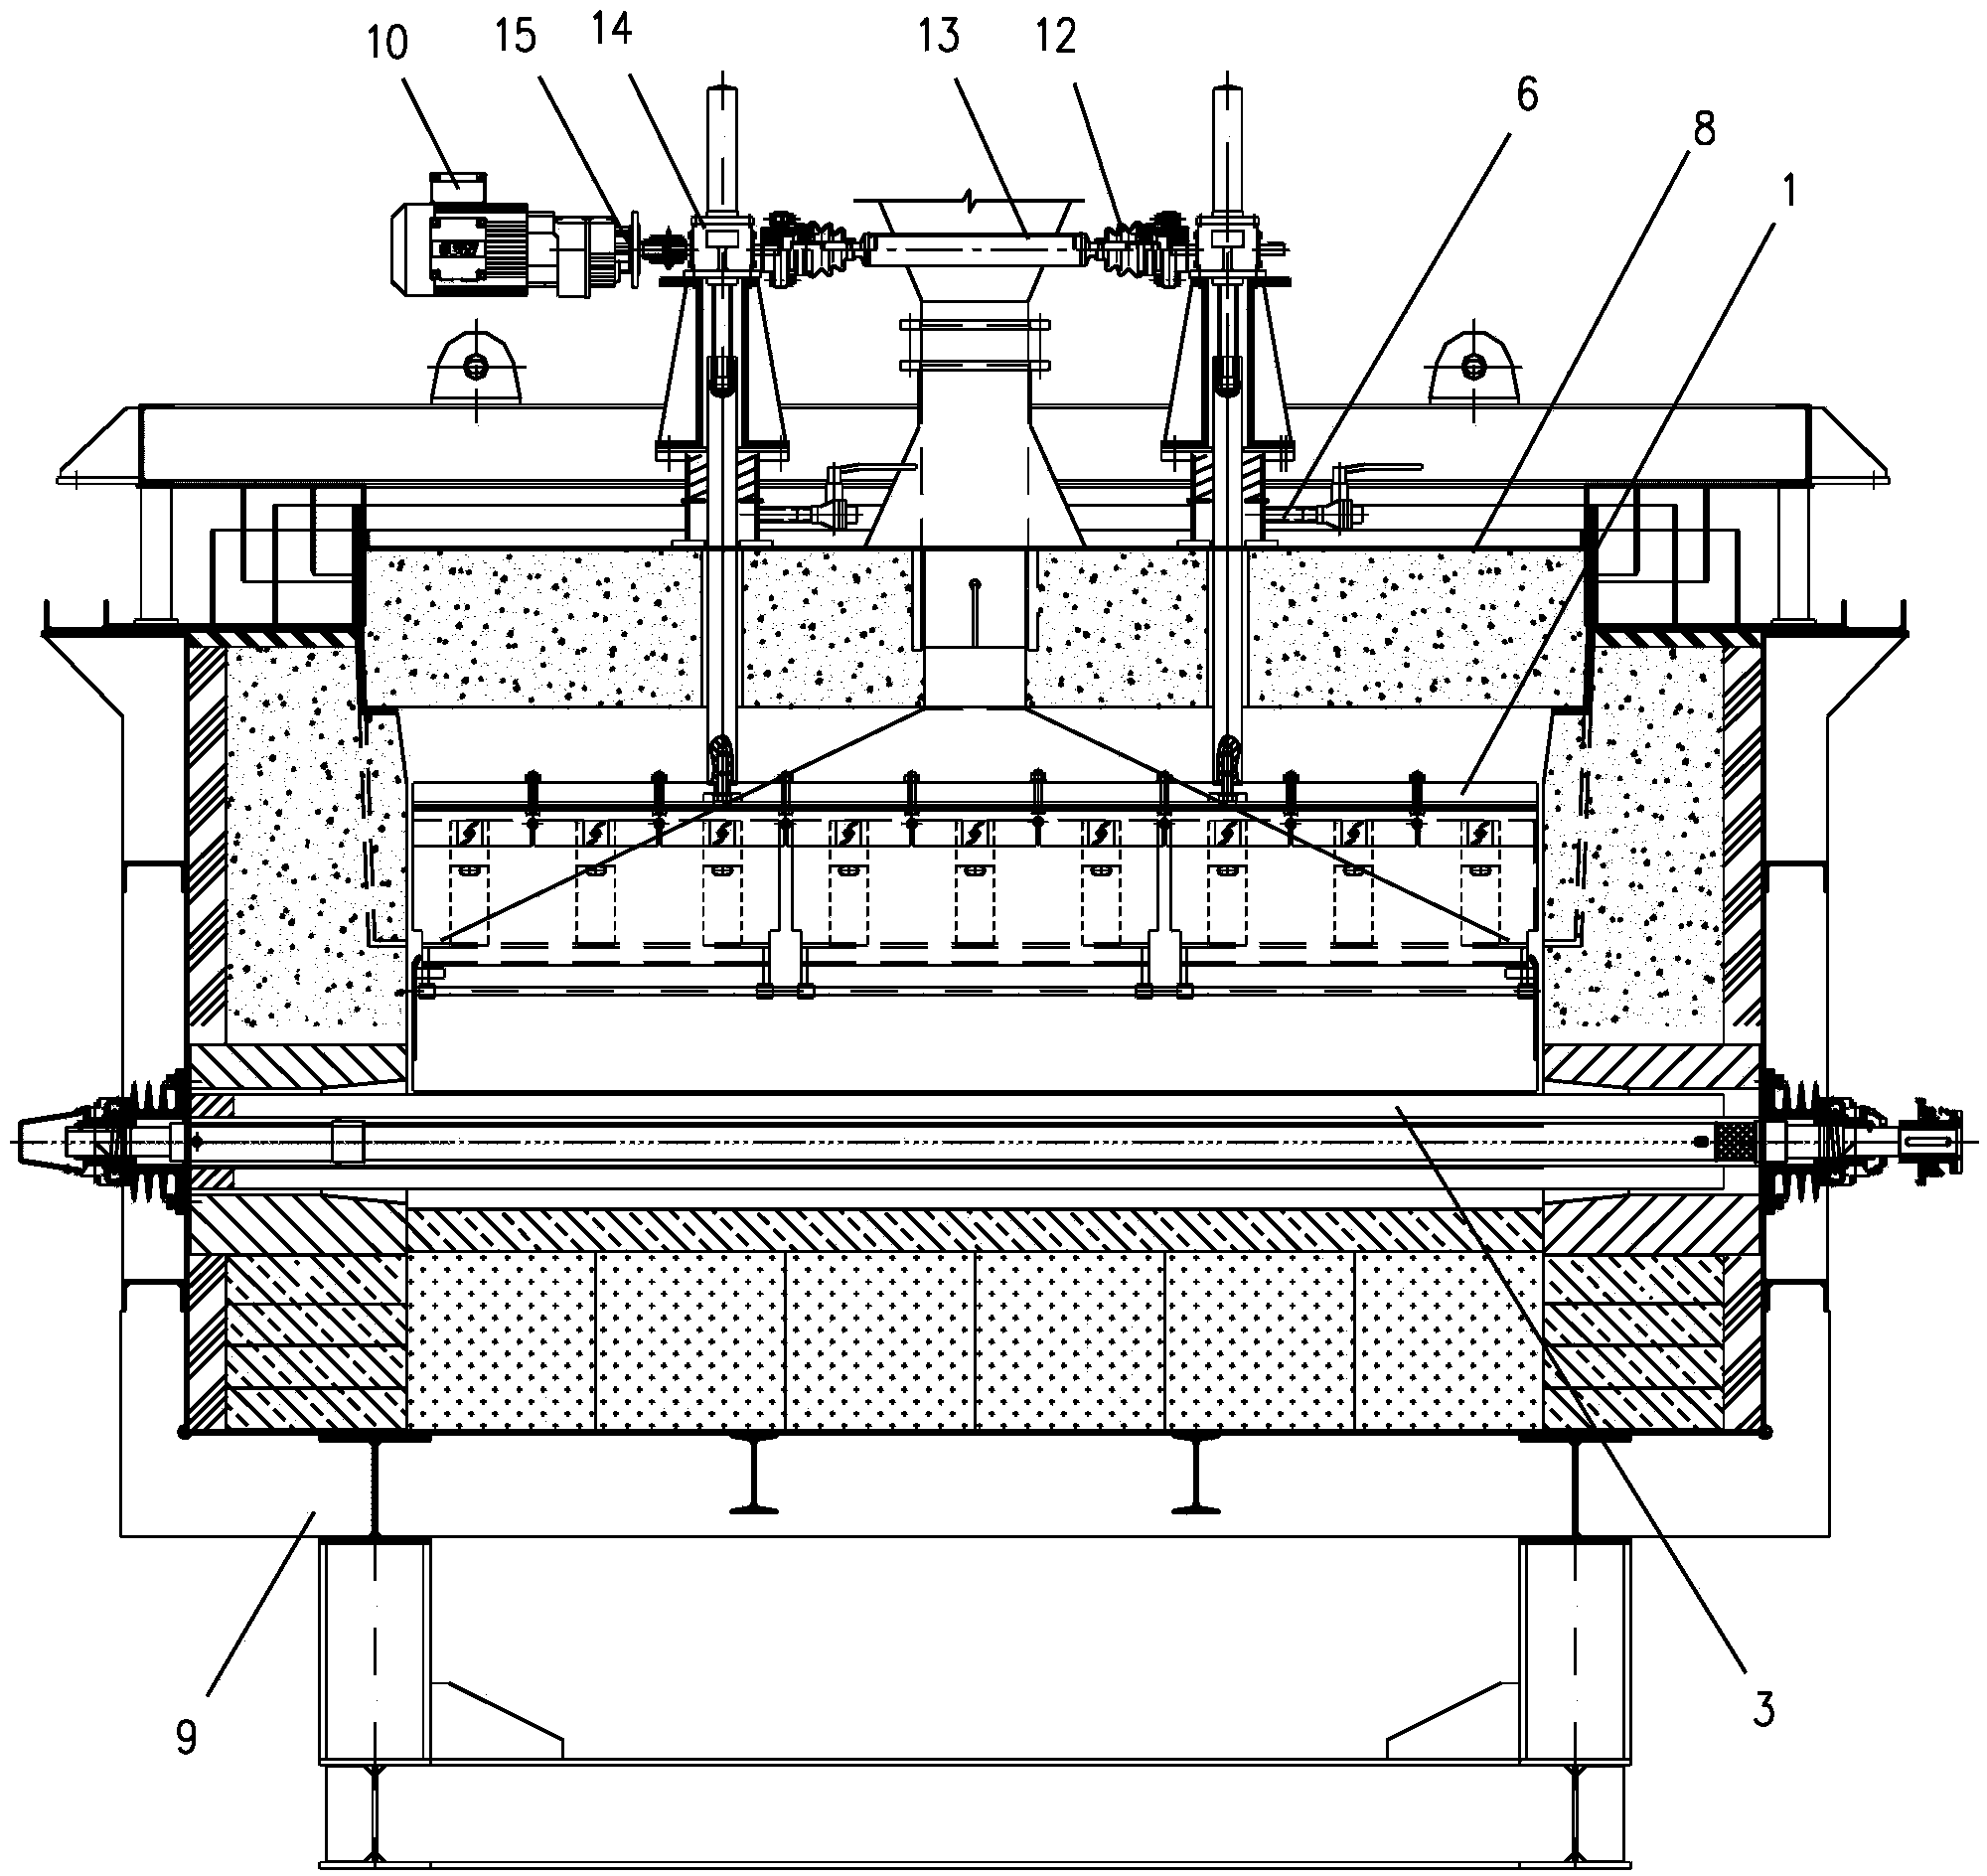 Sealing device for gas isolation of furnace sections